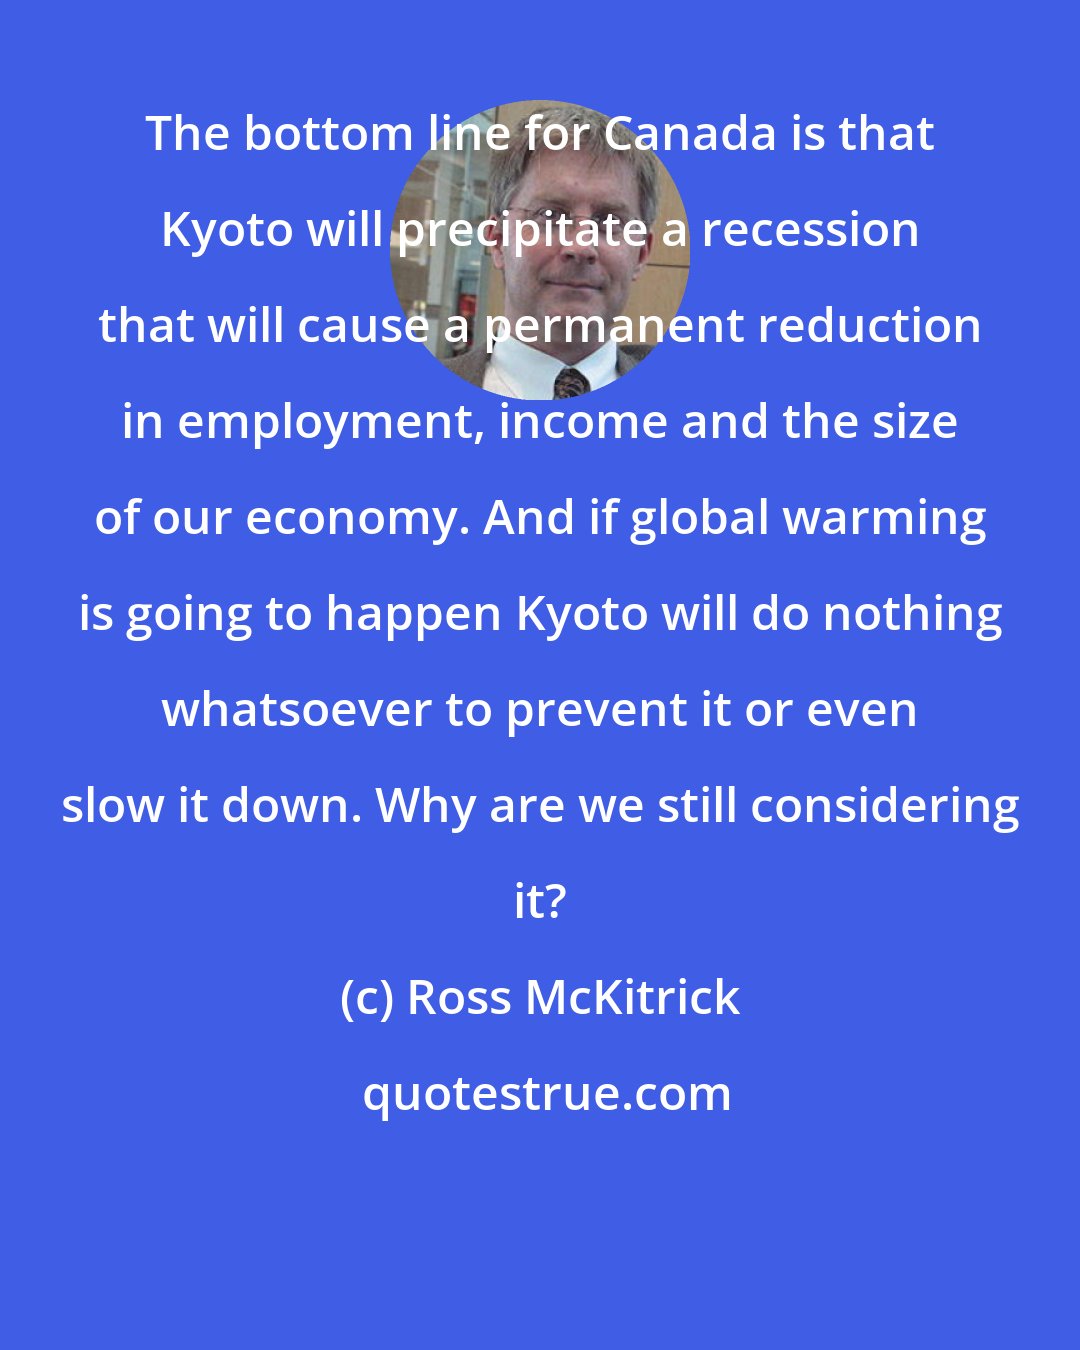 Ross McKitrick: The bottom line for Canada is that Kyoto will precipitate a recession that will cause a permanent reduction in employment, income and the size of our economy. And if global warming is going to happen Kyoto will do nothing whatsoever to prevent it or even slow it down. Why are we still considering it?